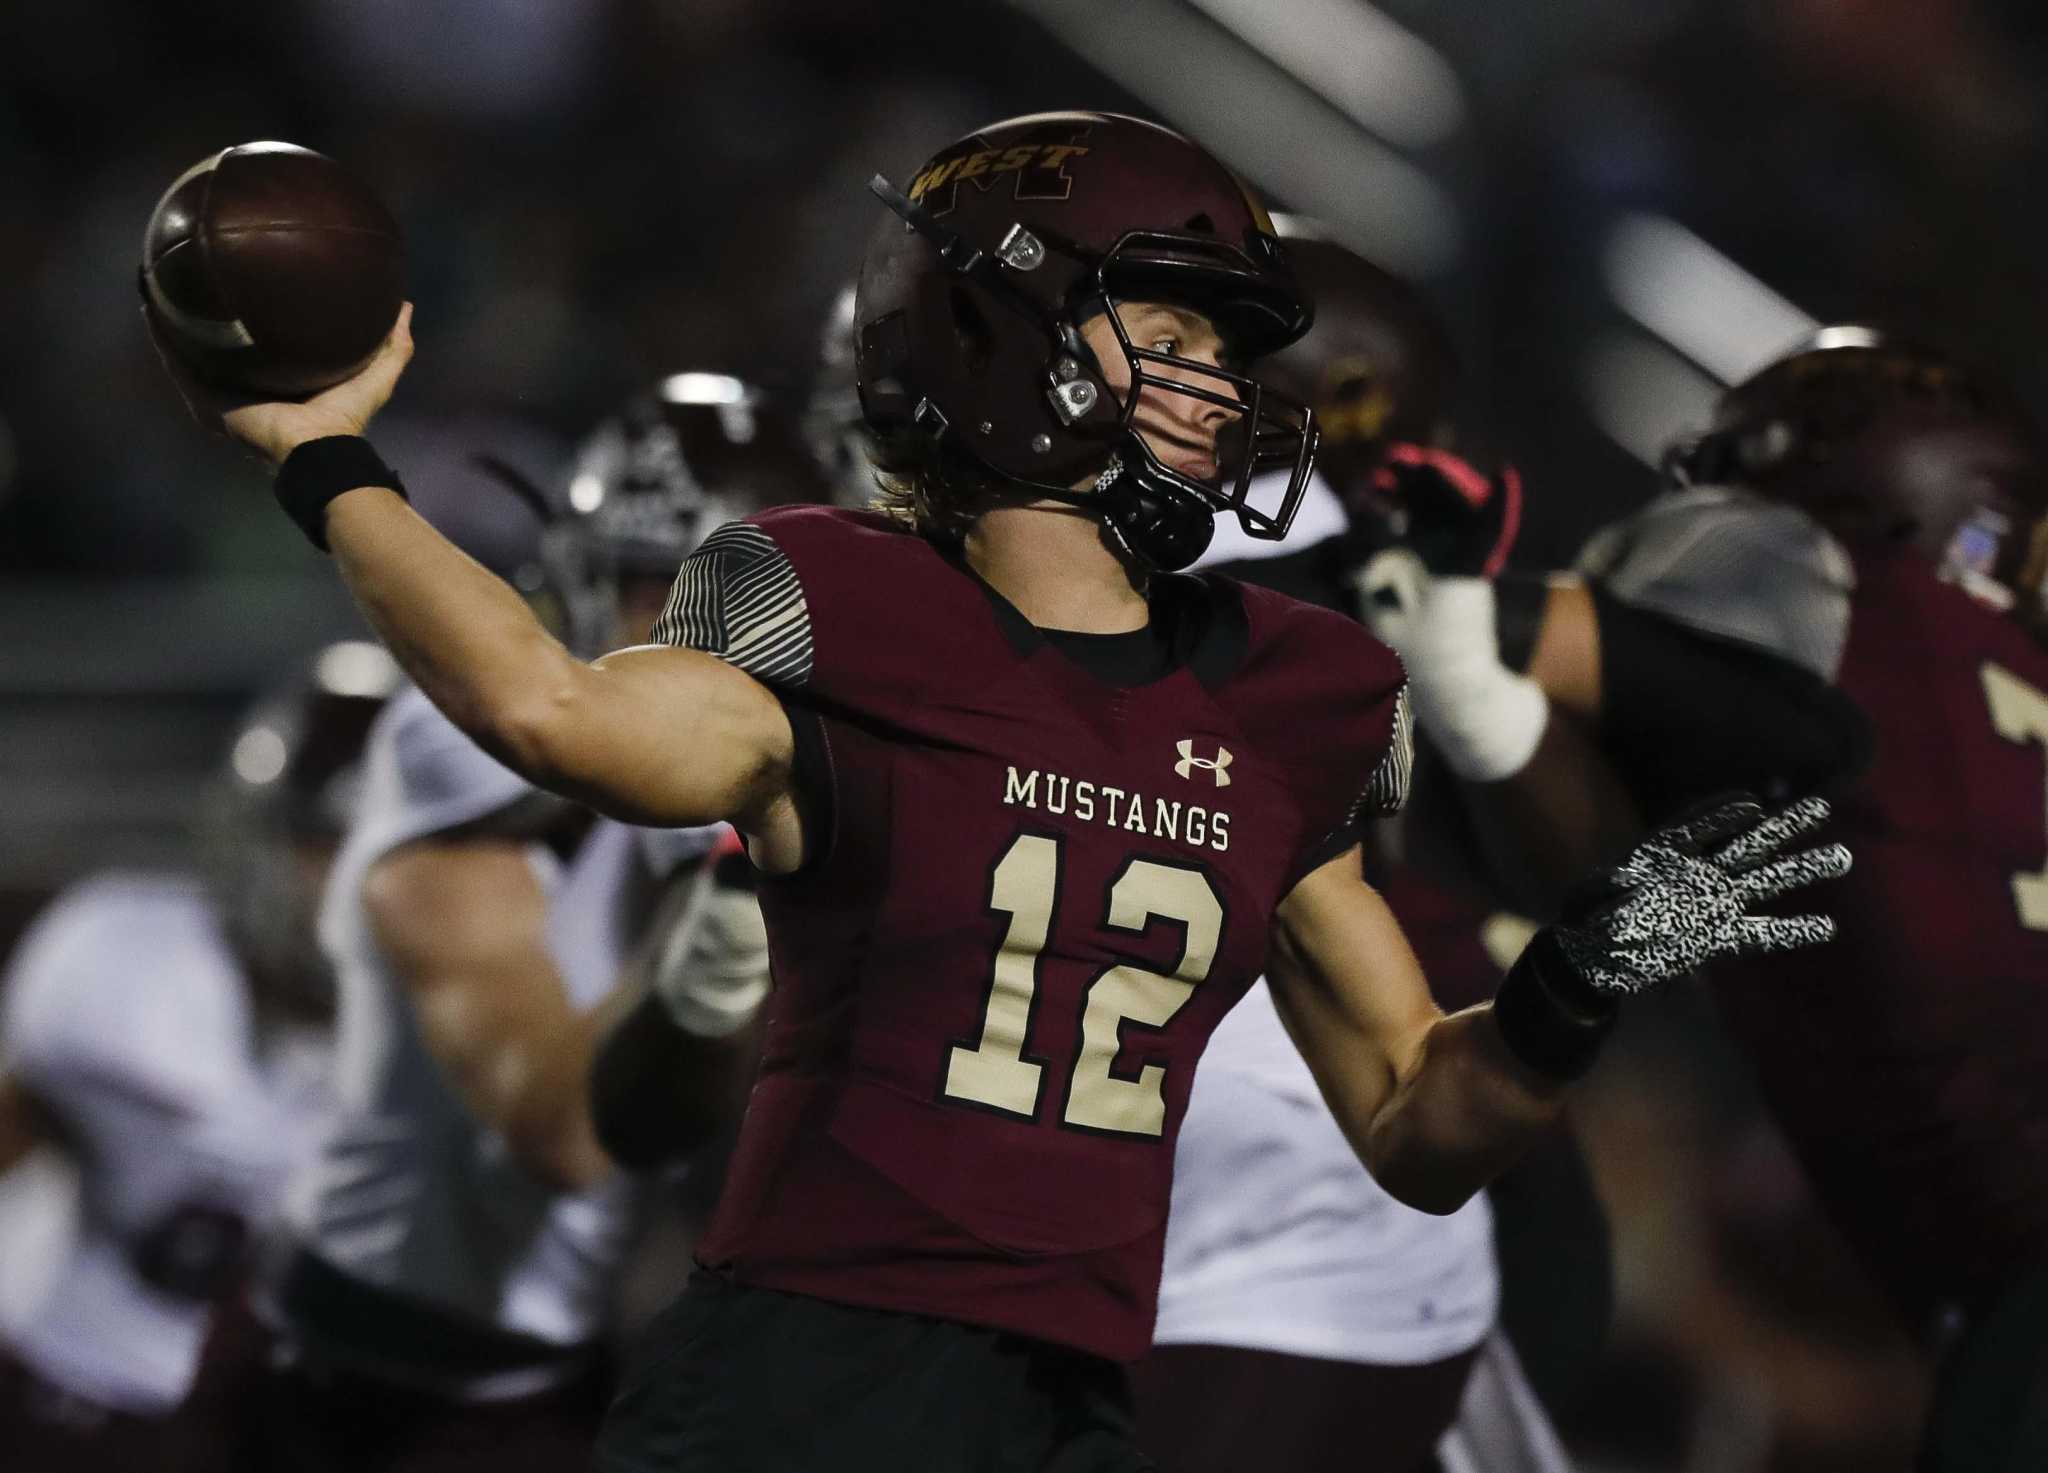 FOOTBALL Magnolia West aims for return to playoffs under McGehee